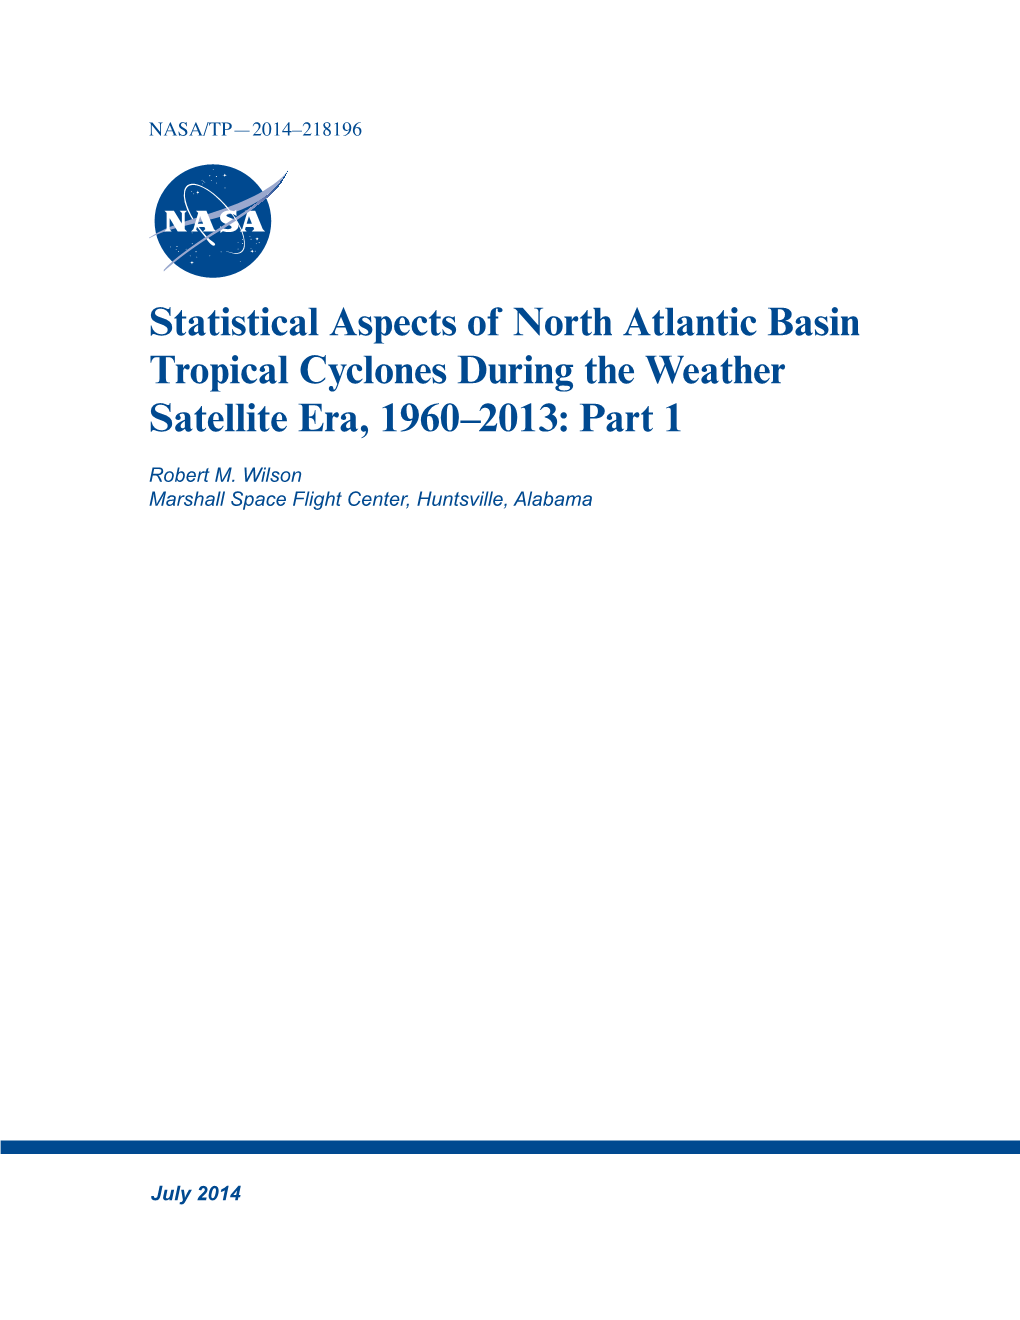 Statistical Aspects of North Atlantic Basin Tropical Cyclones During the Weather Satellite Era, 1960–2013: Part 1